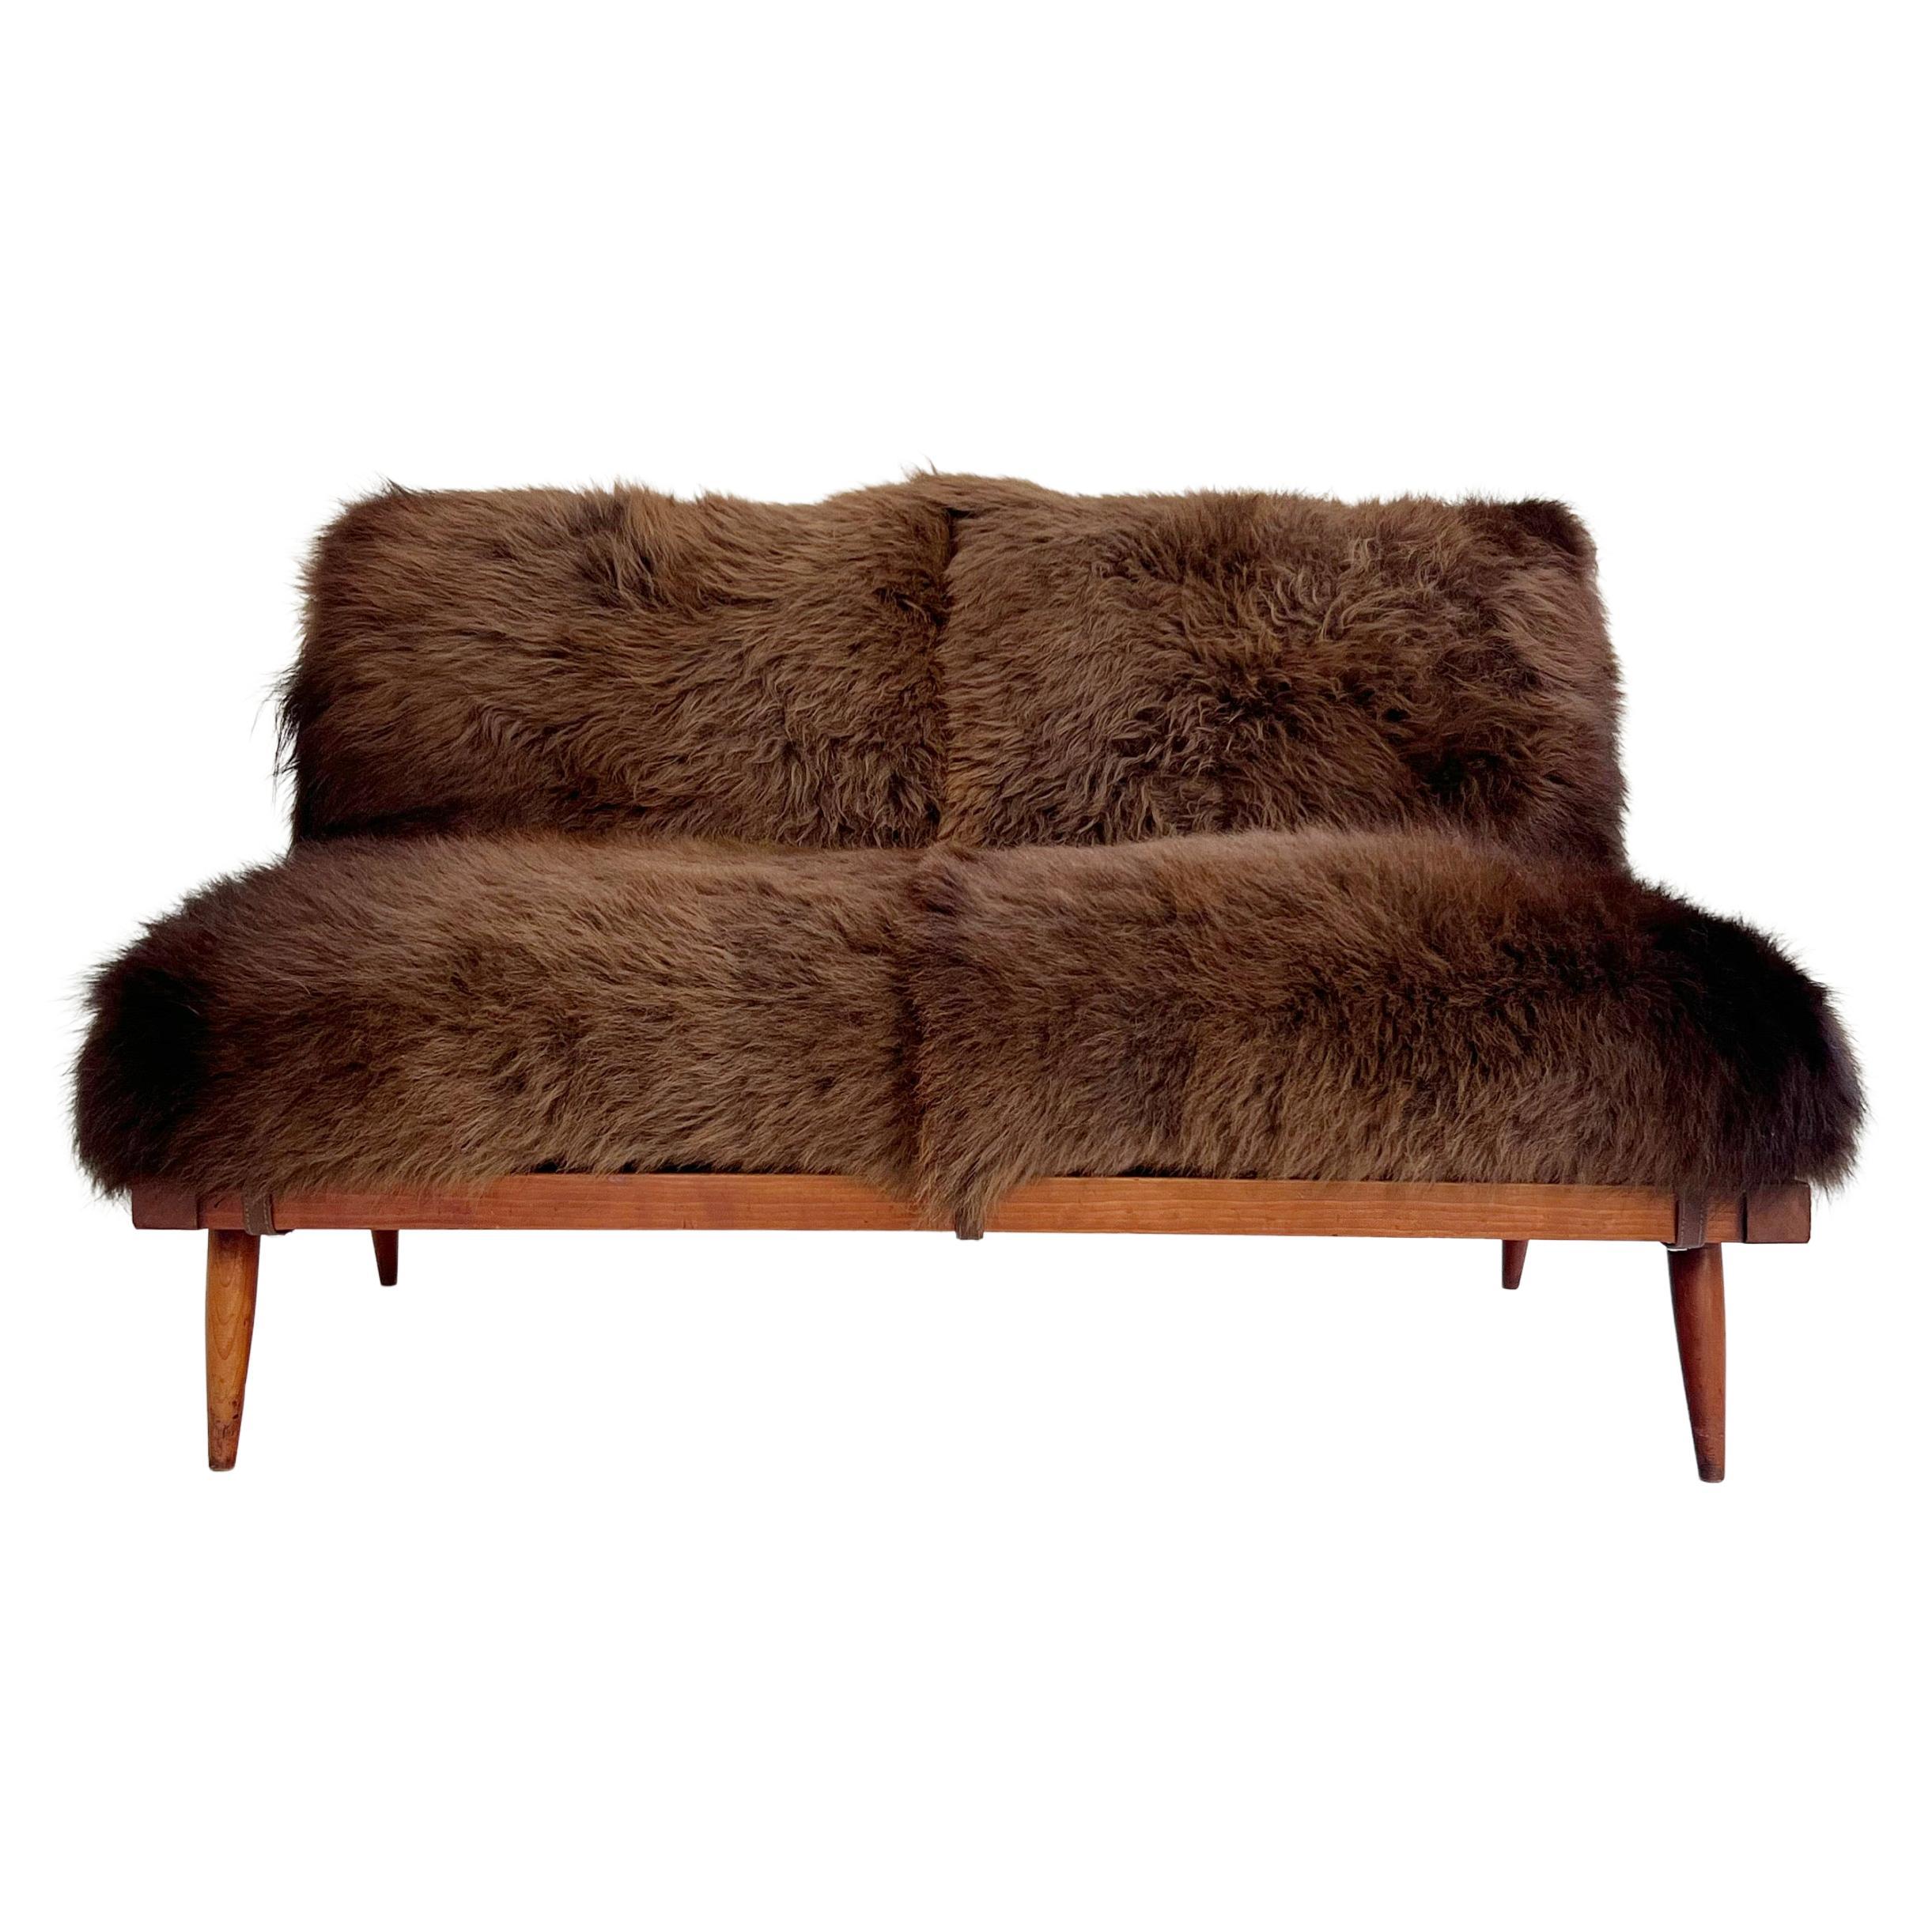 George Nakashima Settee with American Bison Hide Cushions For Sale